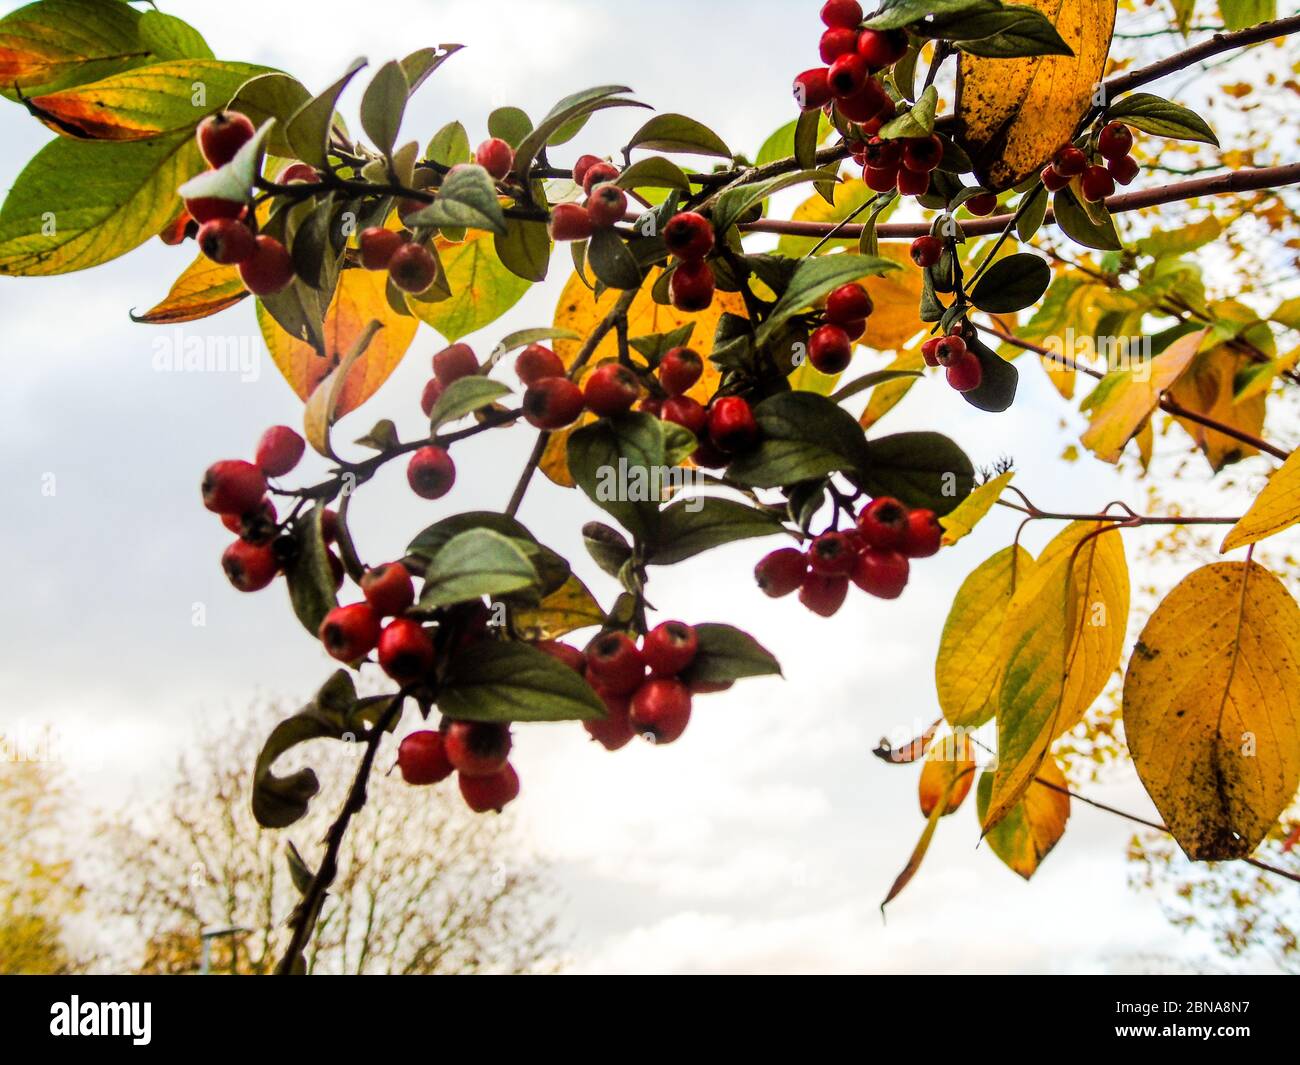 Red java apple fruits hanging from a tree with green and yellow leaves against a cloudy day Stock Photo